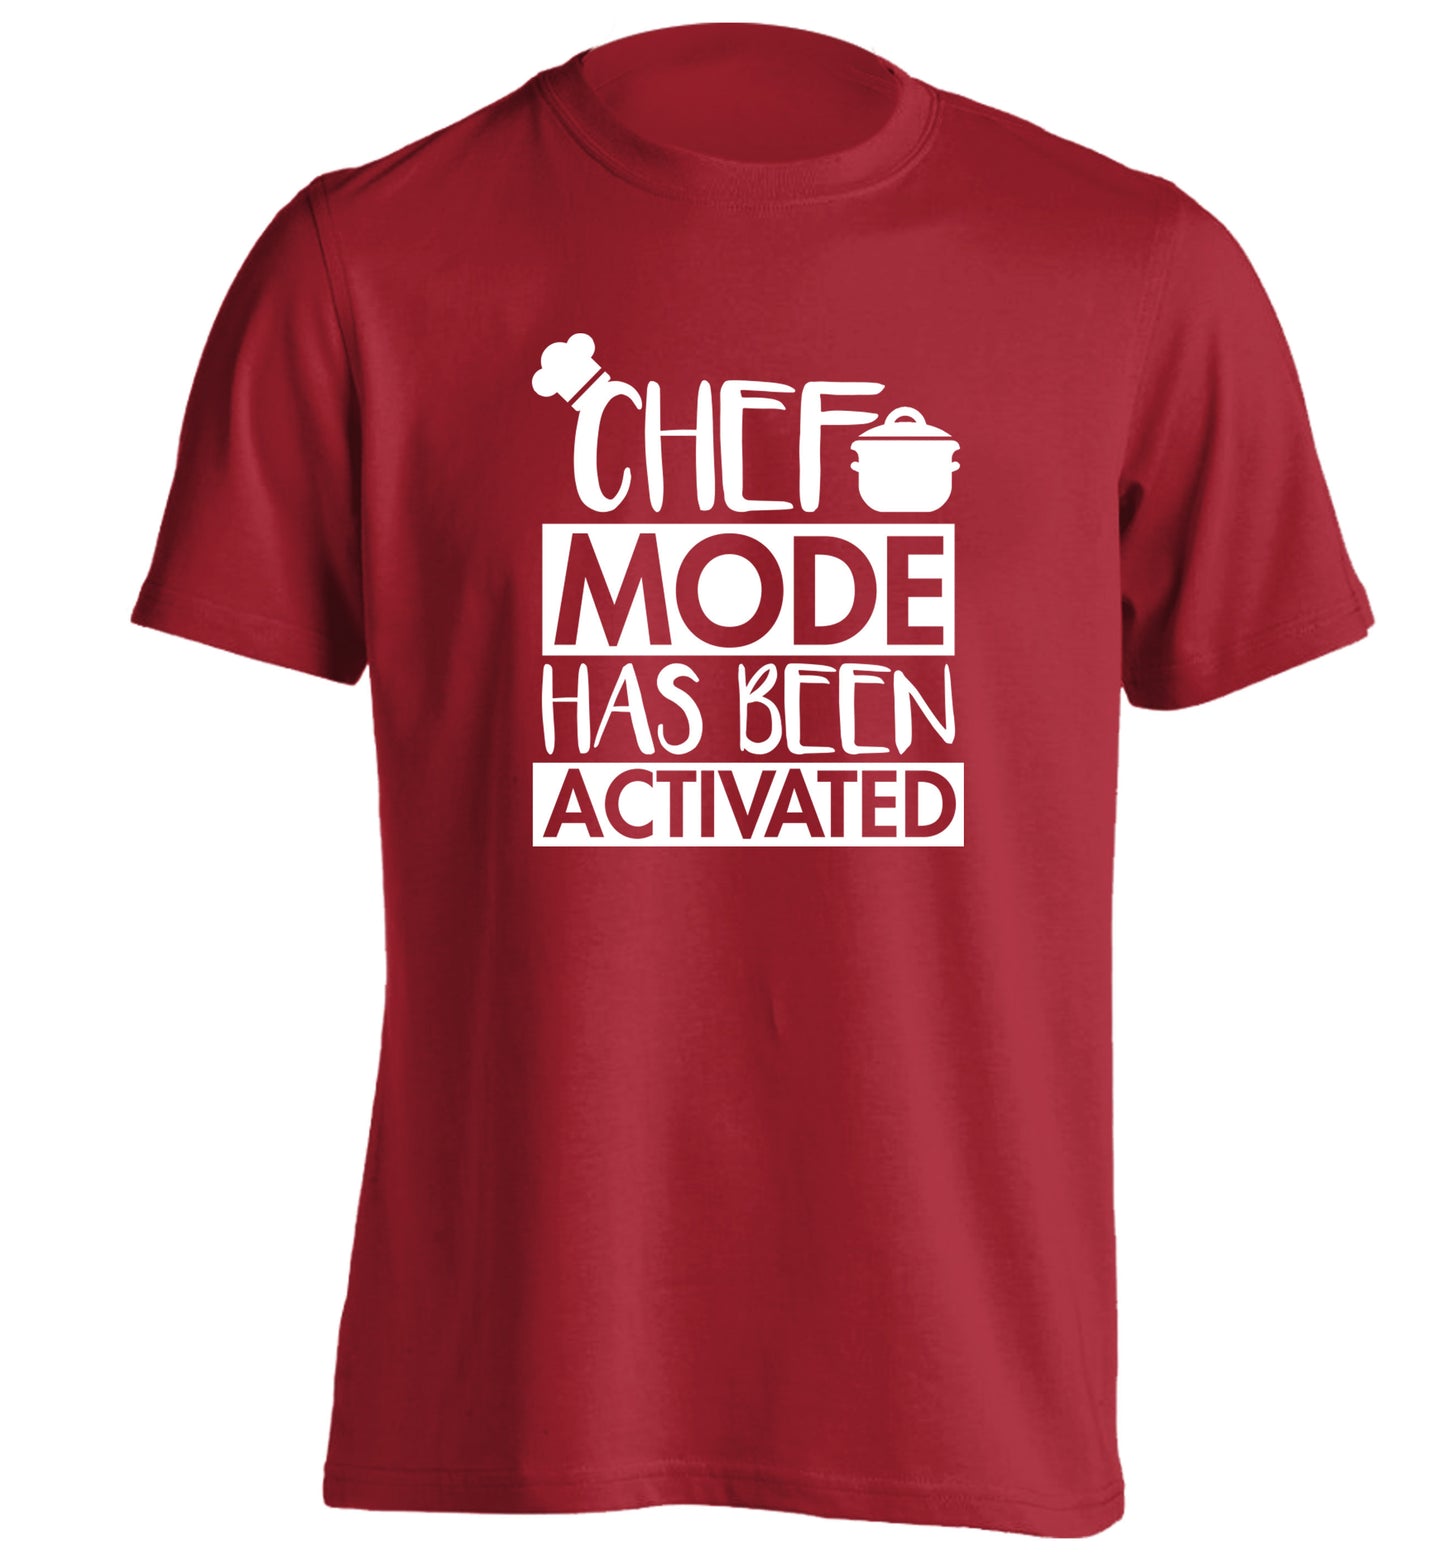 Chef mode has been activated adults unisex red Tshirt 2XL